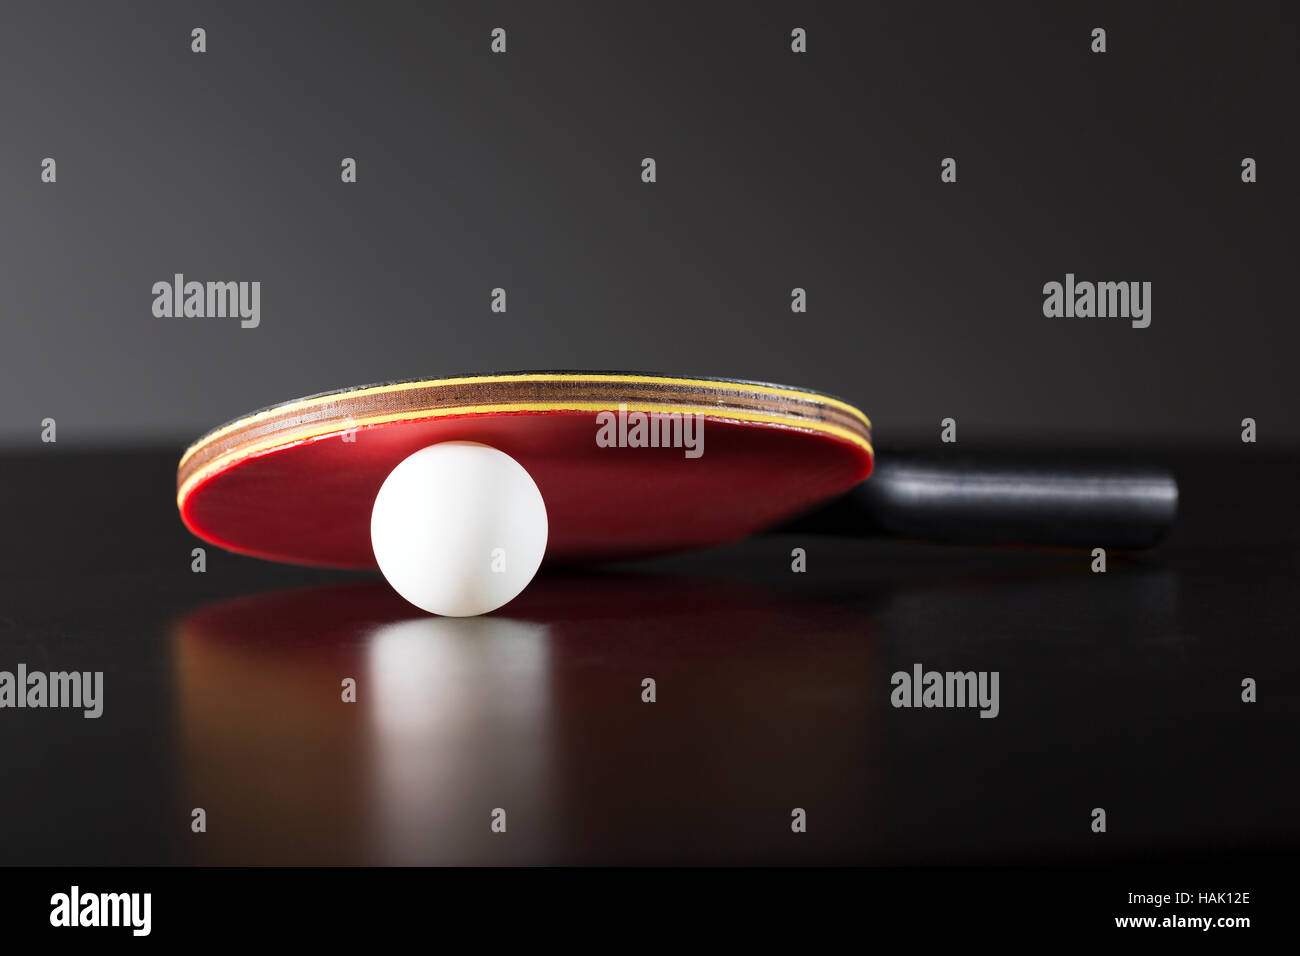 ping pong racket and ball on dark table Stock Photo